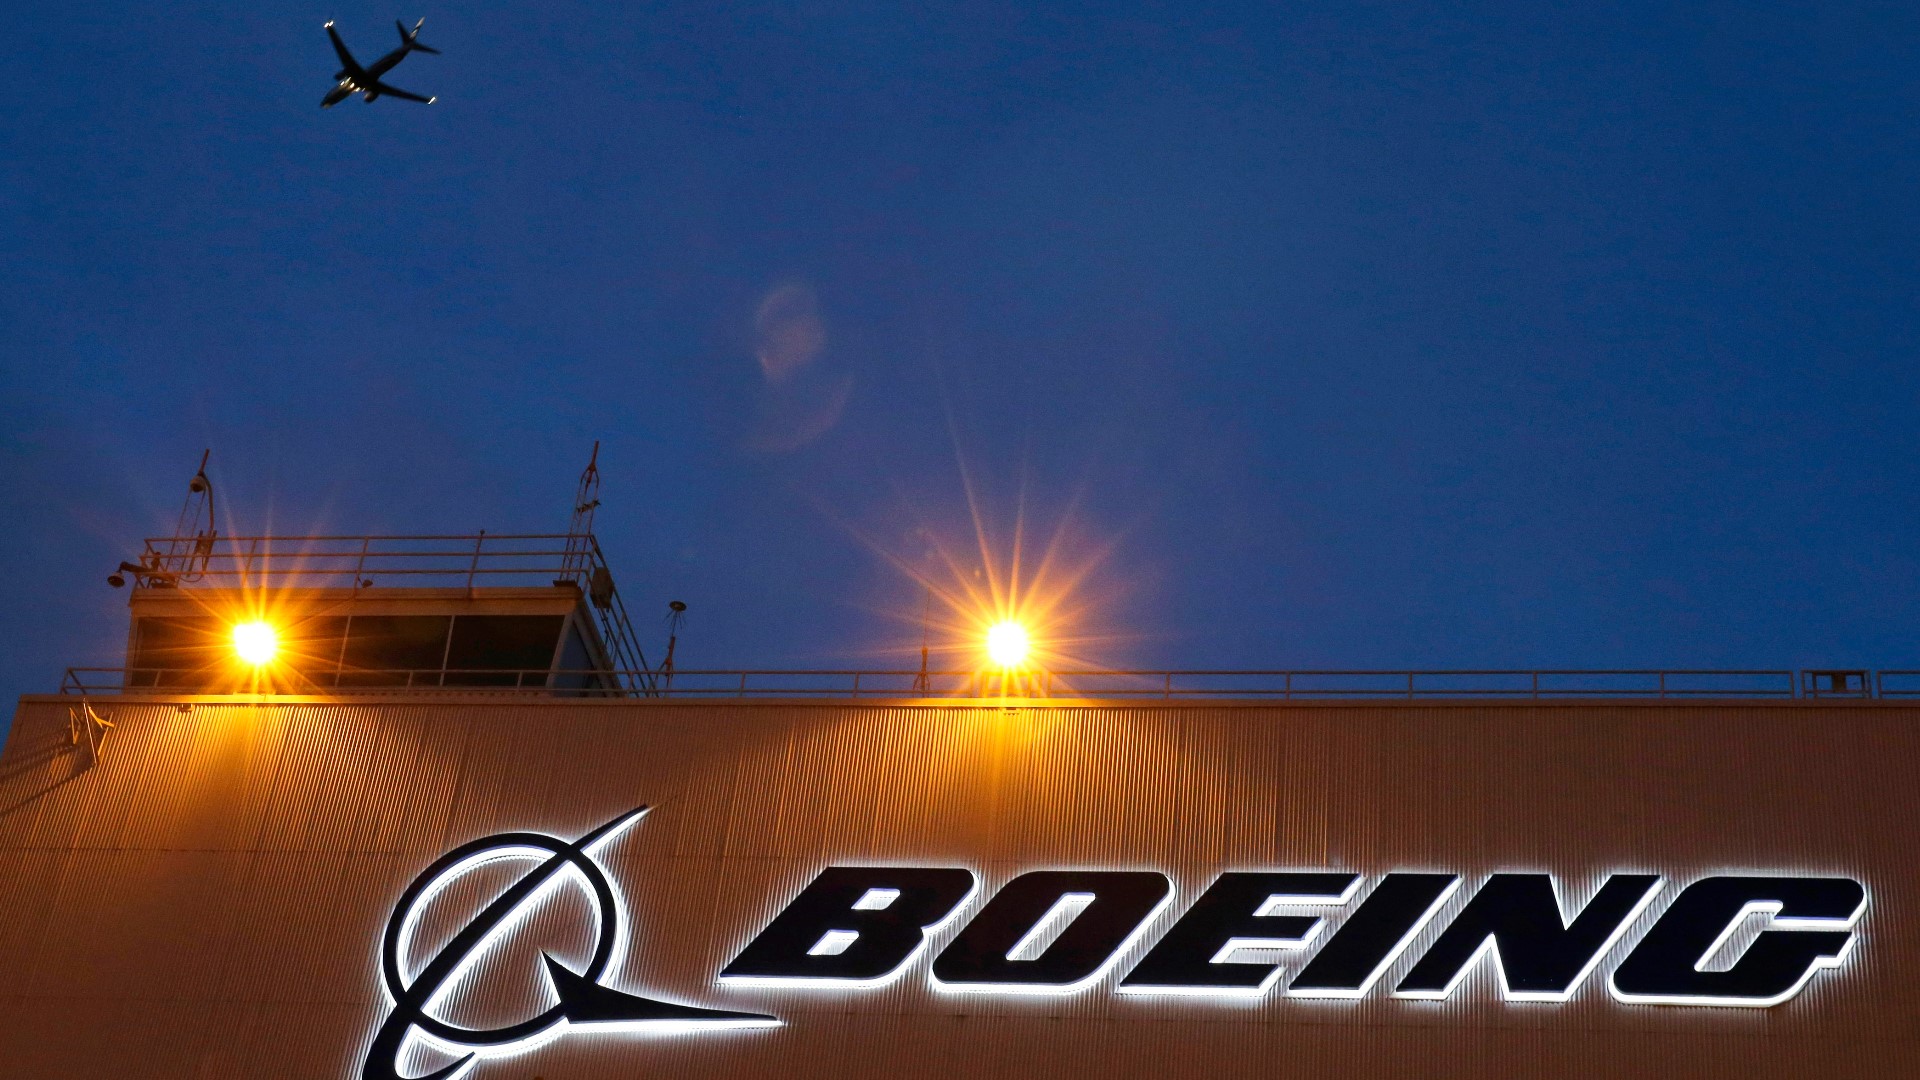 Boeing has been in crisis mode since a door-plug panel blew off a 737 Max jetliner during an Alaska Airlines flight in January.